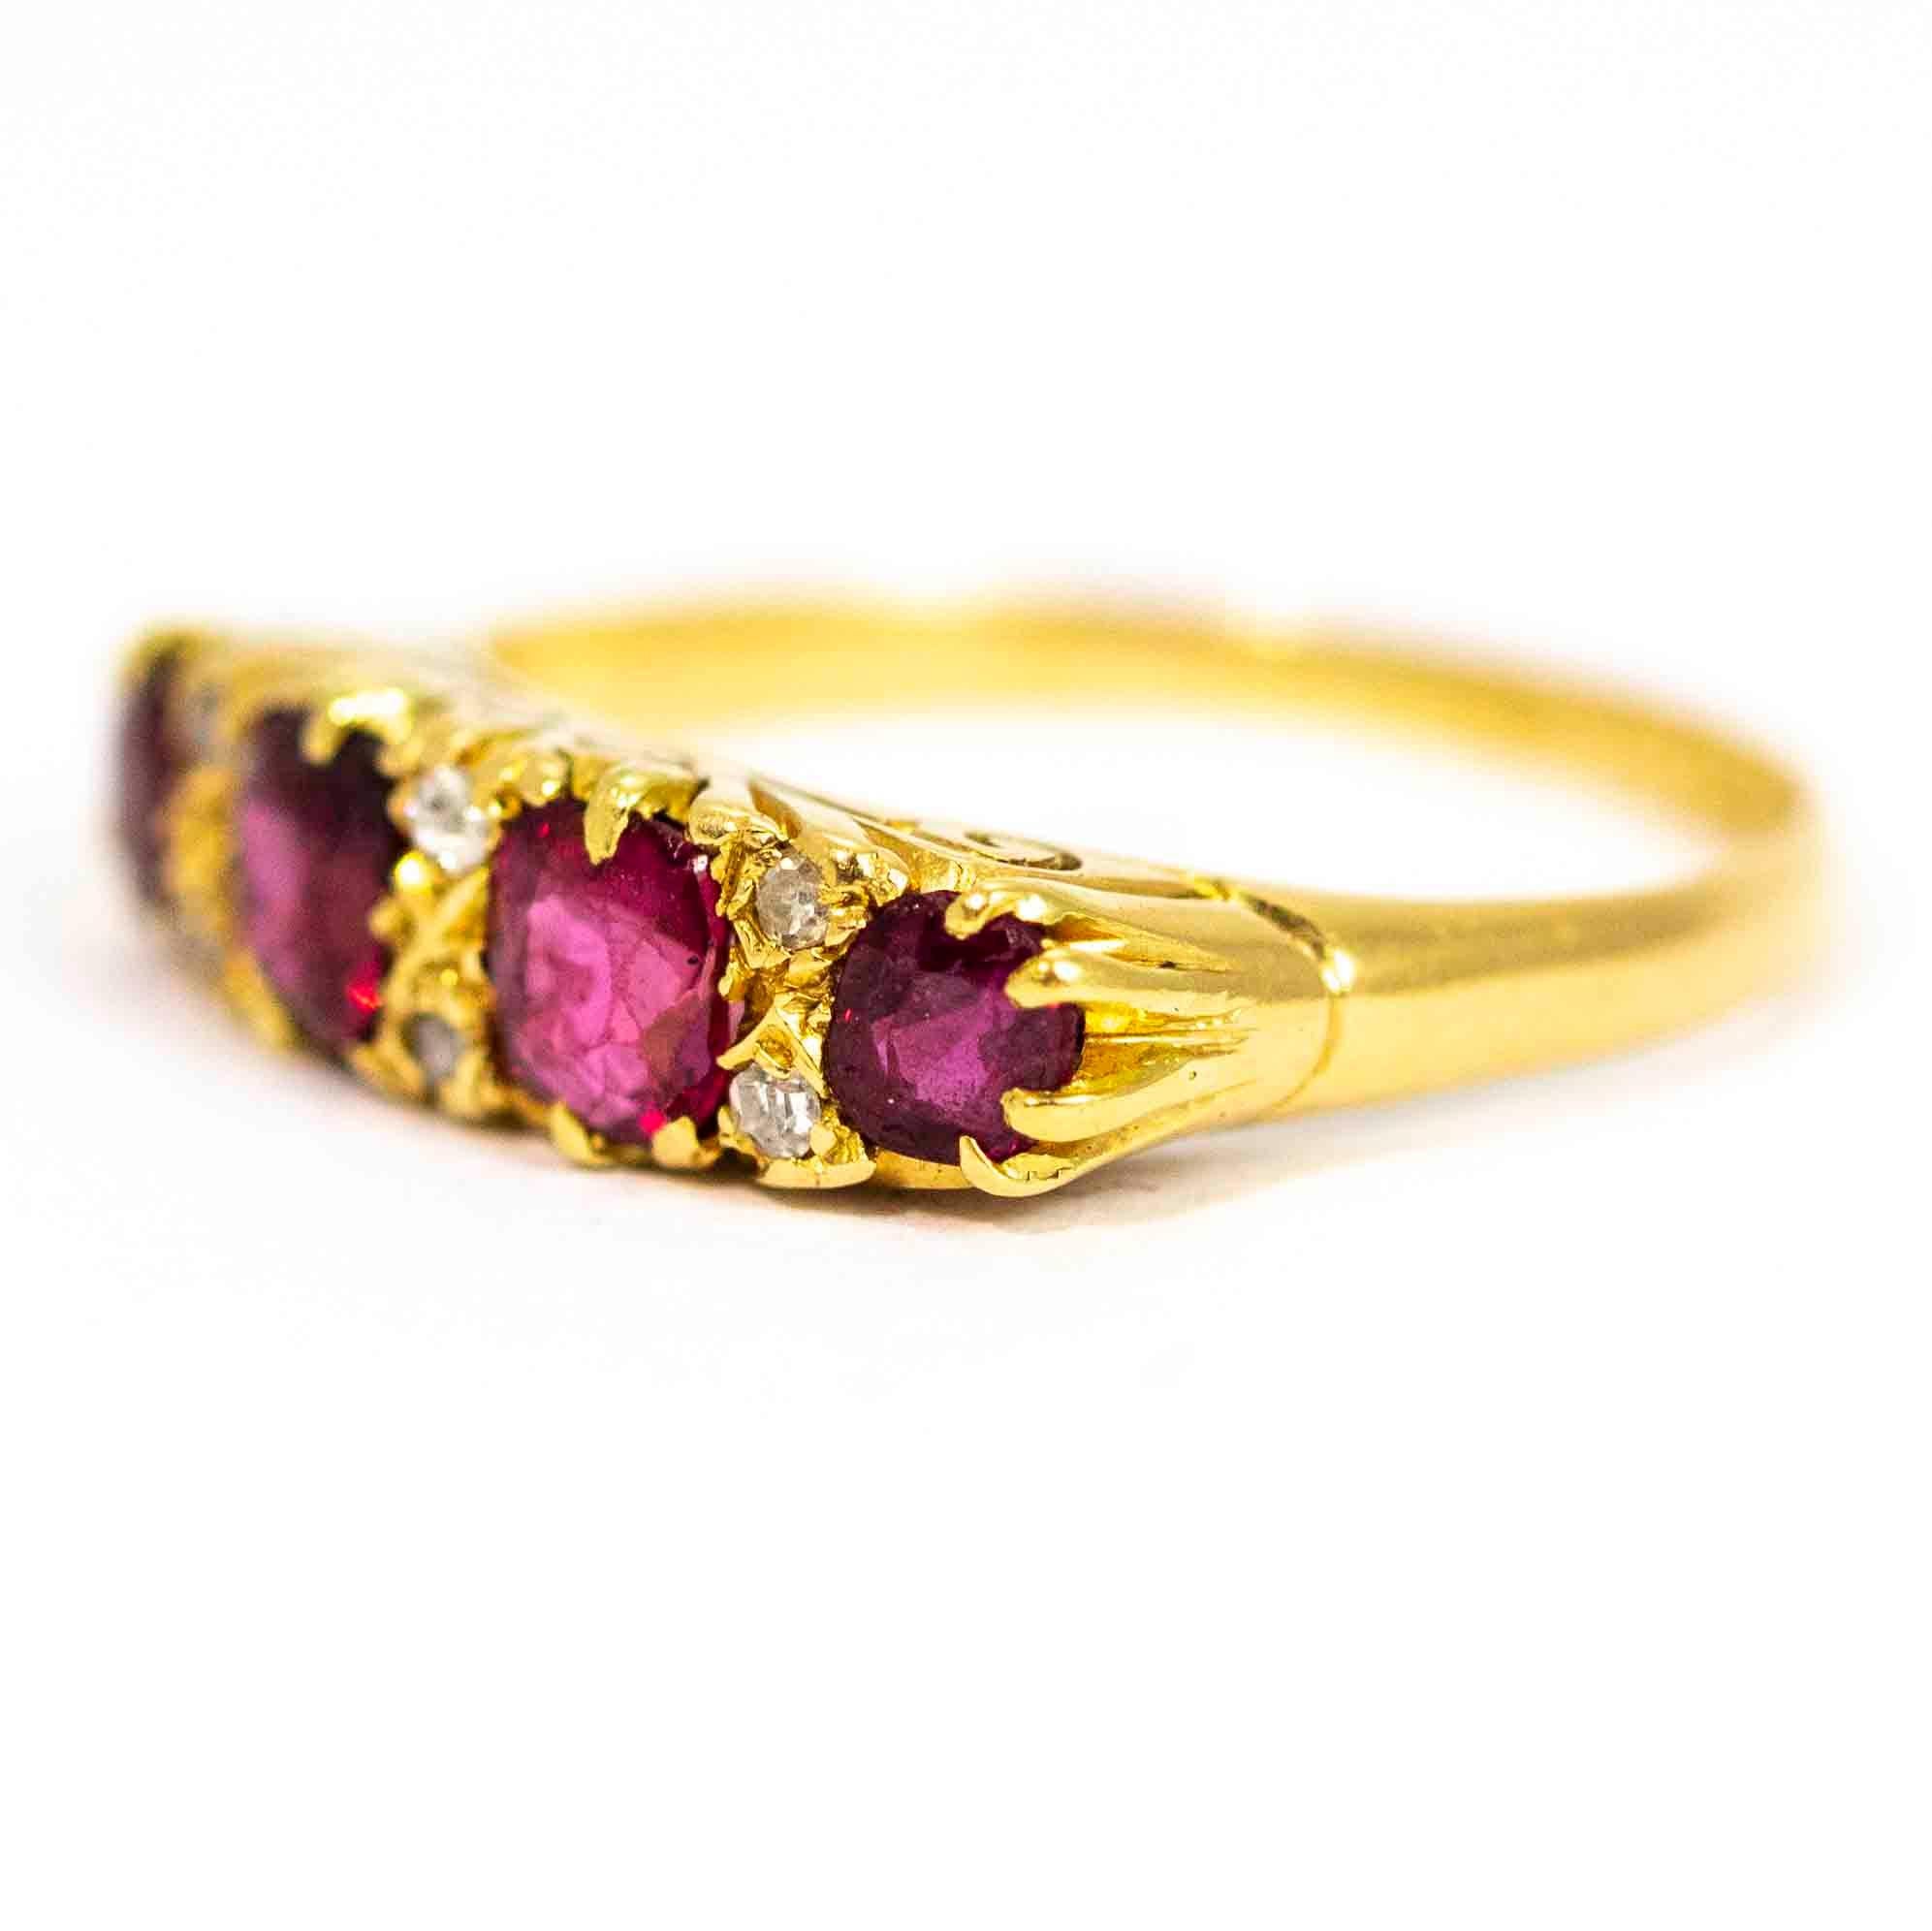 A wonderful antique Victorian four-stone ring set with beautiful cushion cut rubies. At points between the rubies are six superb diamond points. Modelled in 18 carat yellow gold.

Ring Size: UK L, US 6